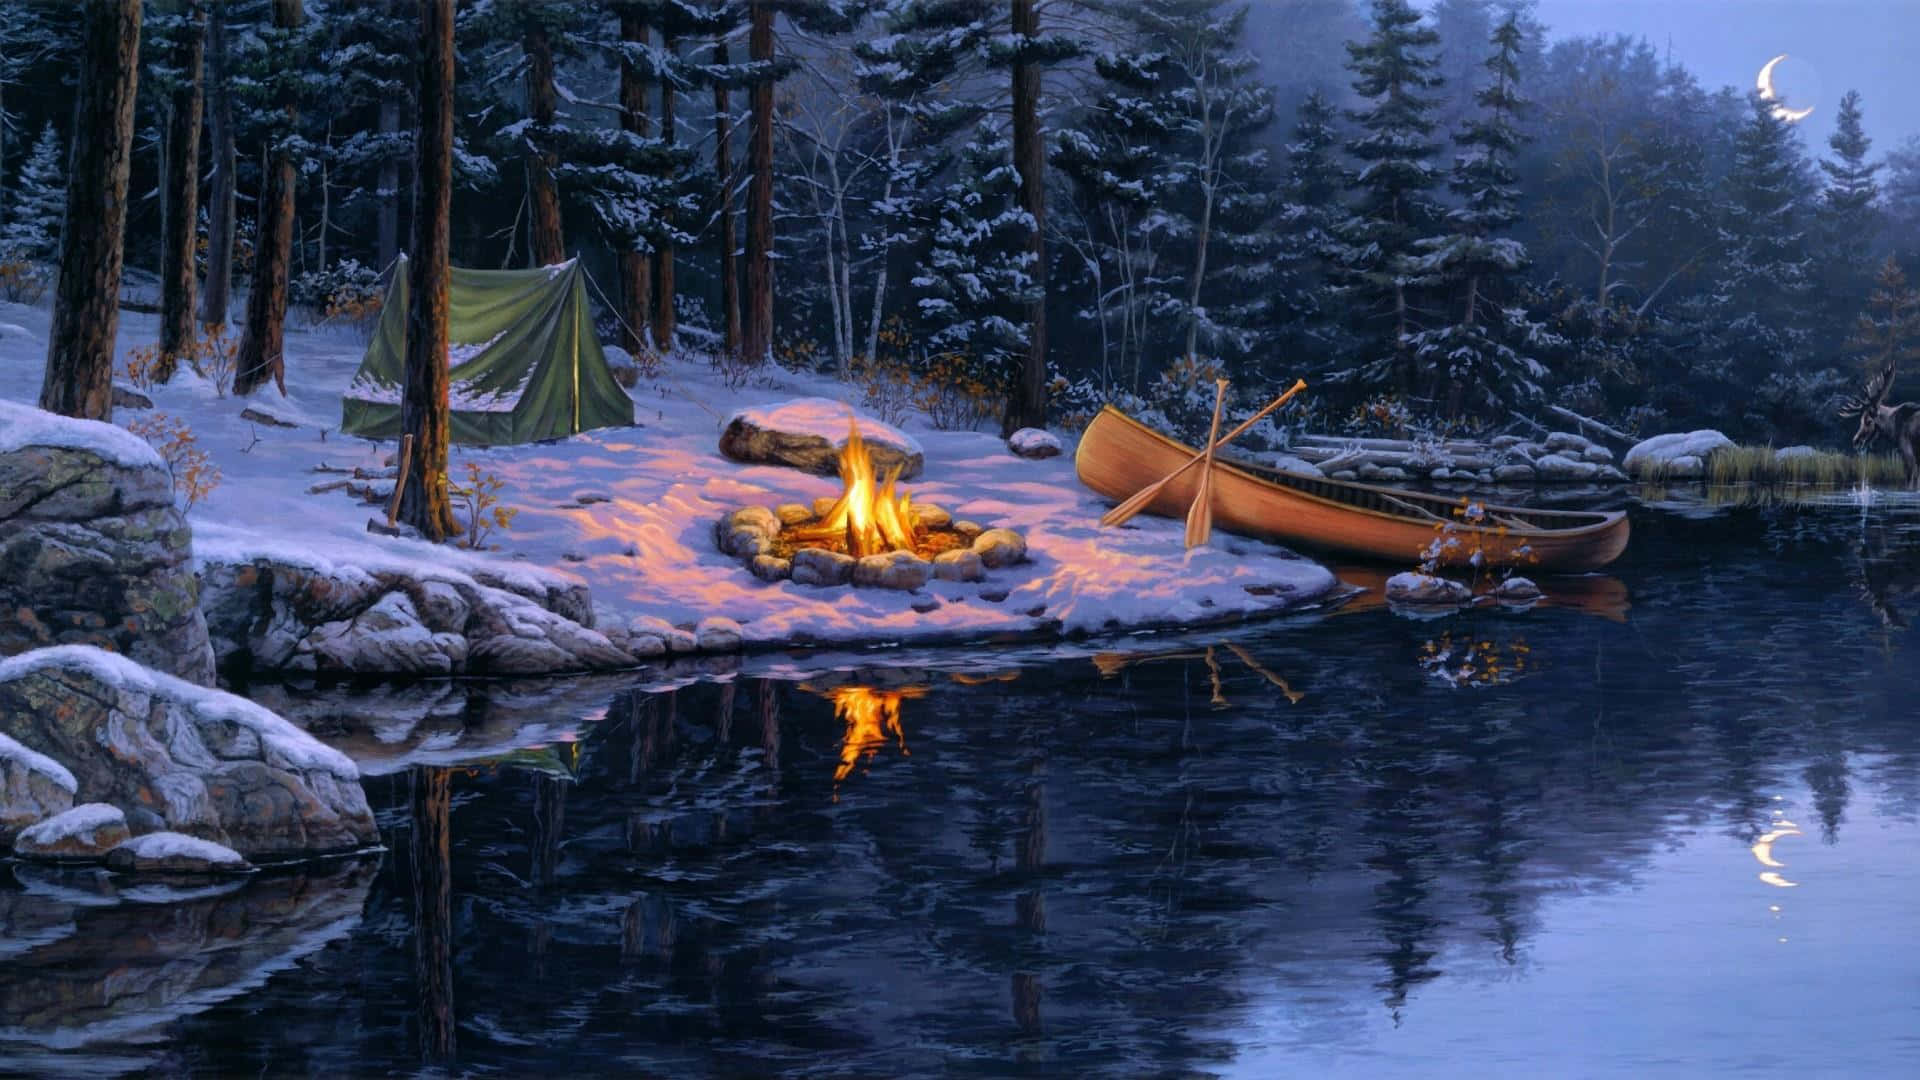 A warm and mesmerizing campfire in the middle of the wilderness